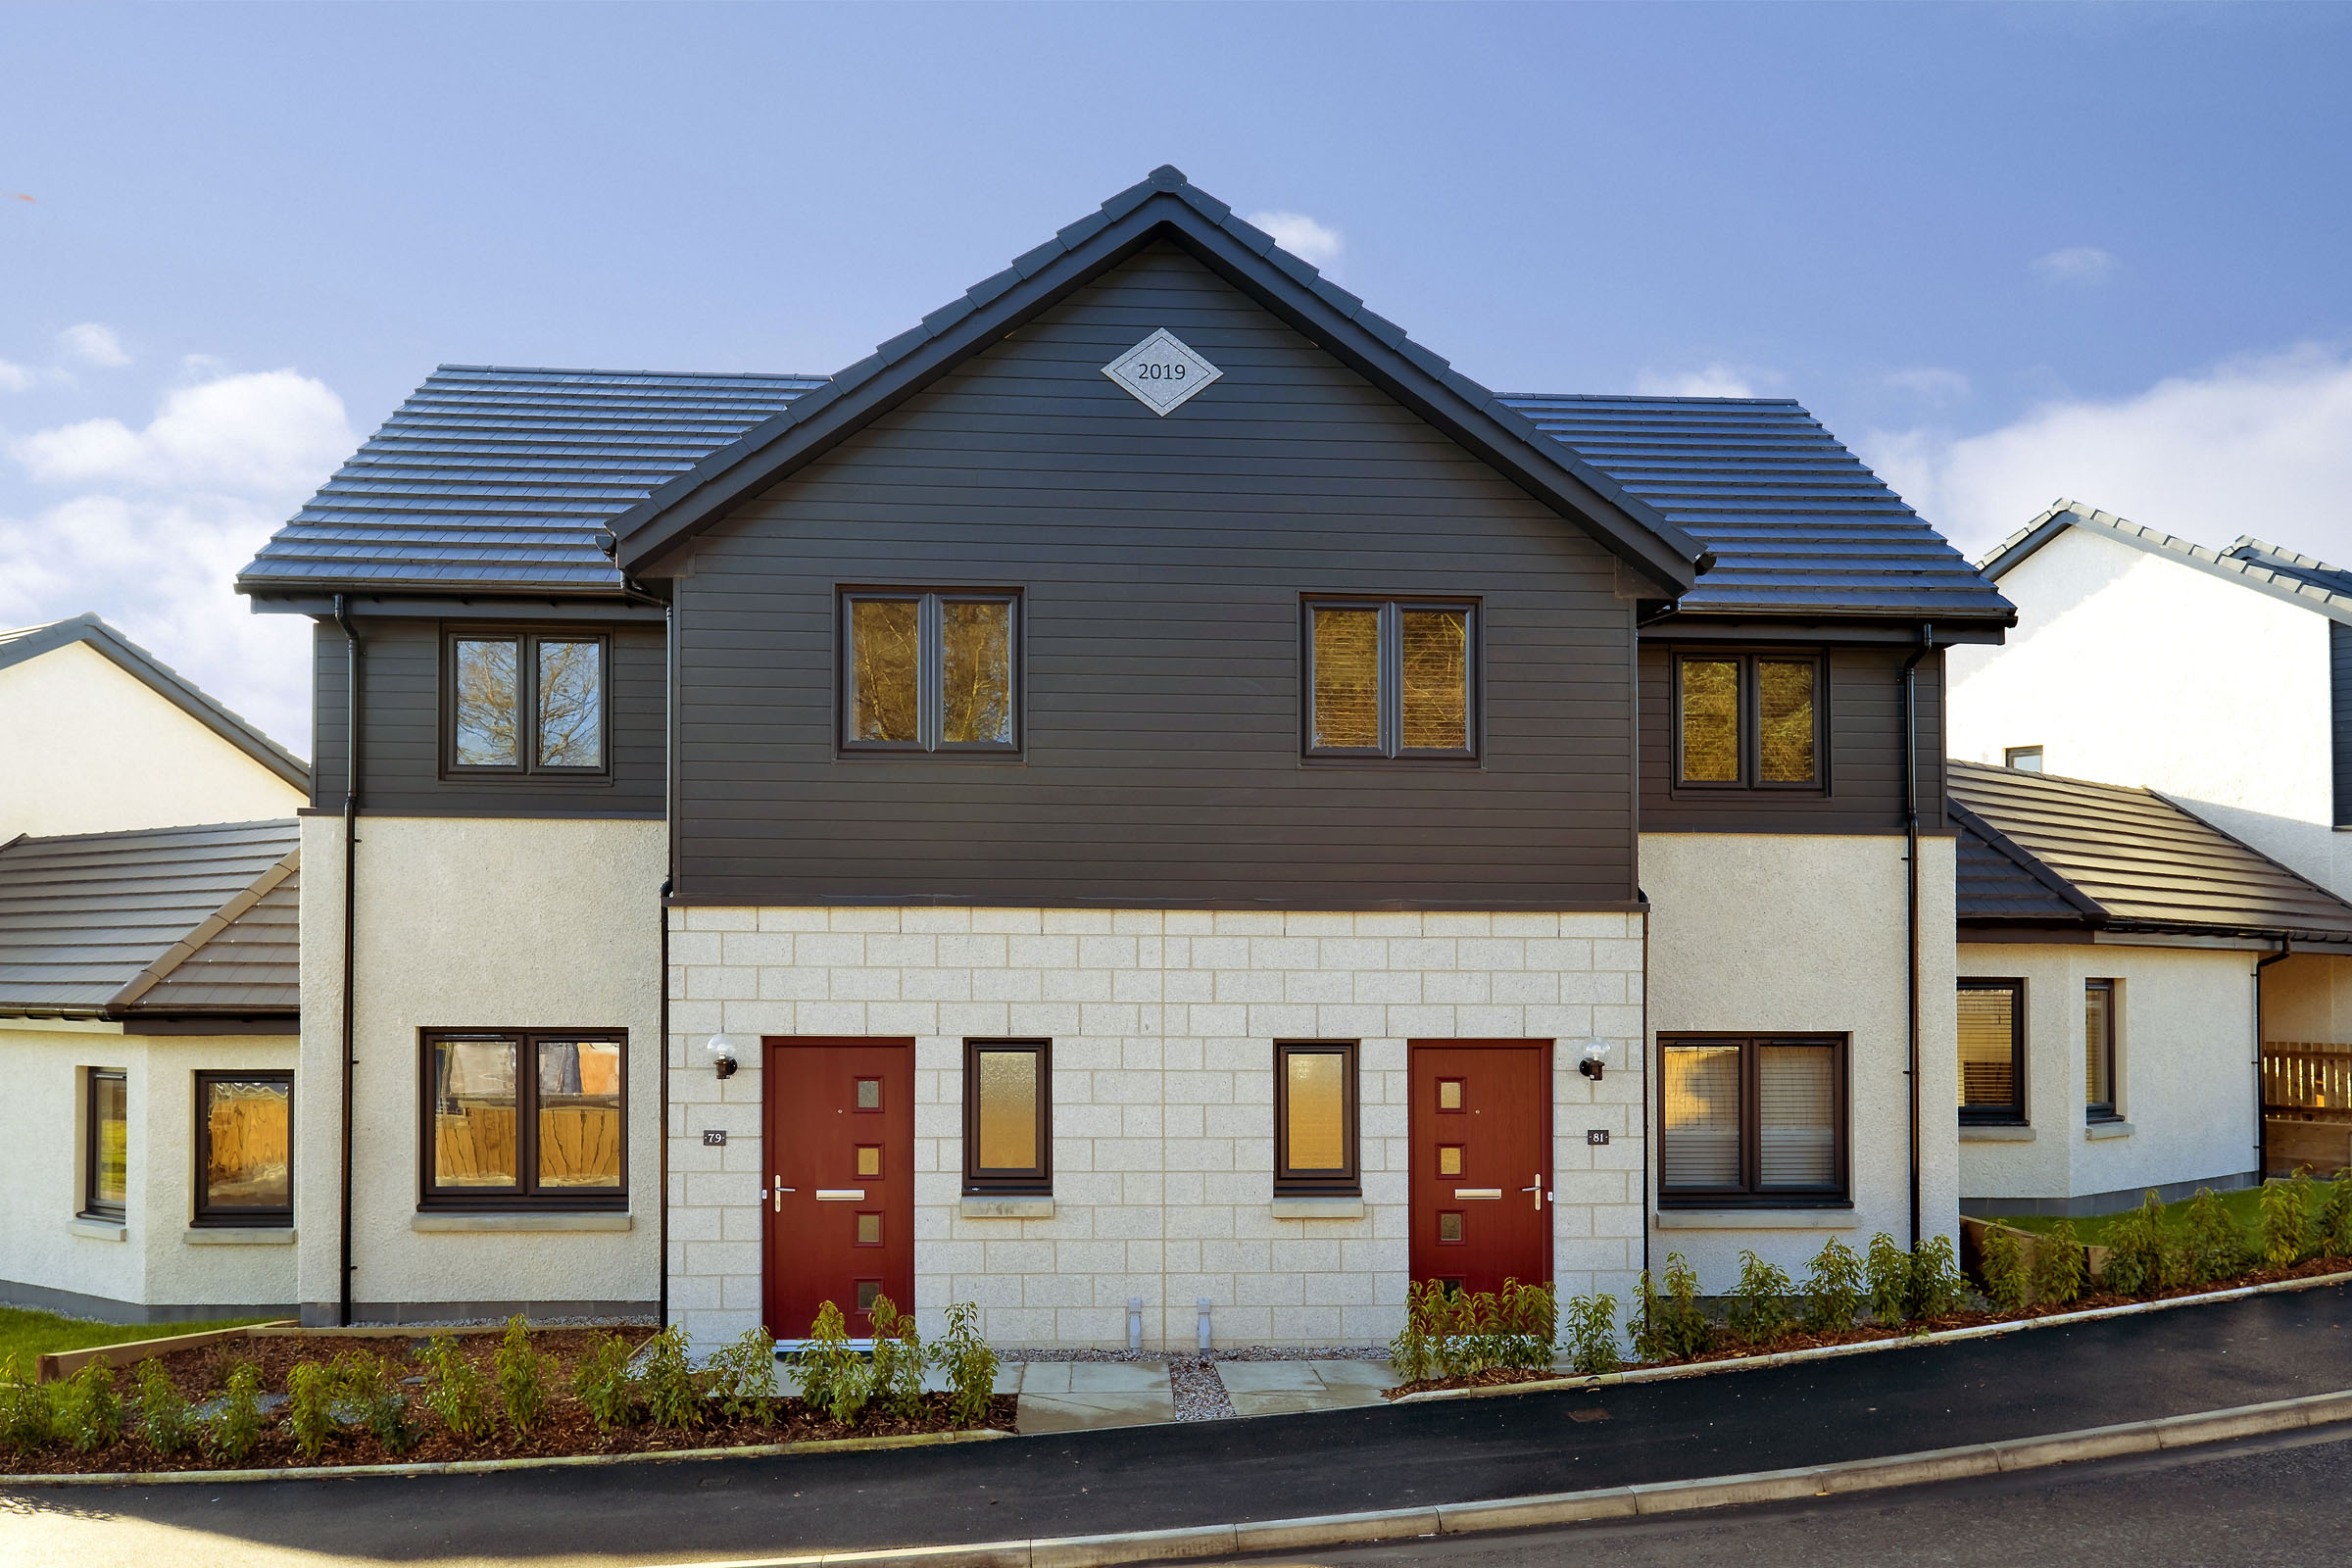 Bancon obtains planning approval for 200 homes at Maidencraig South